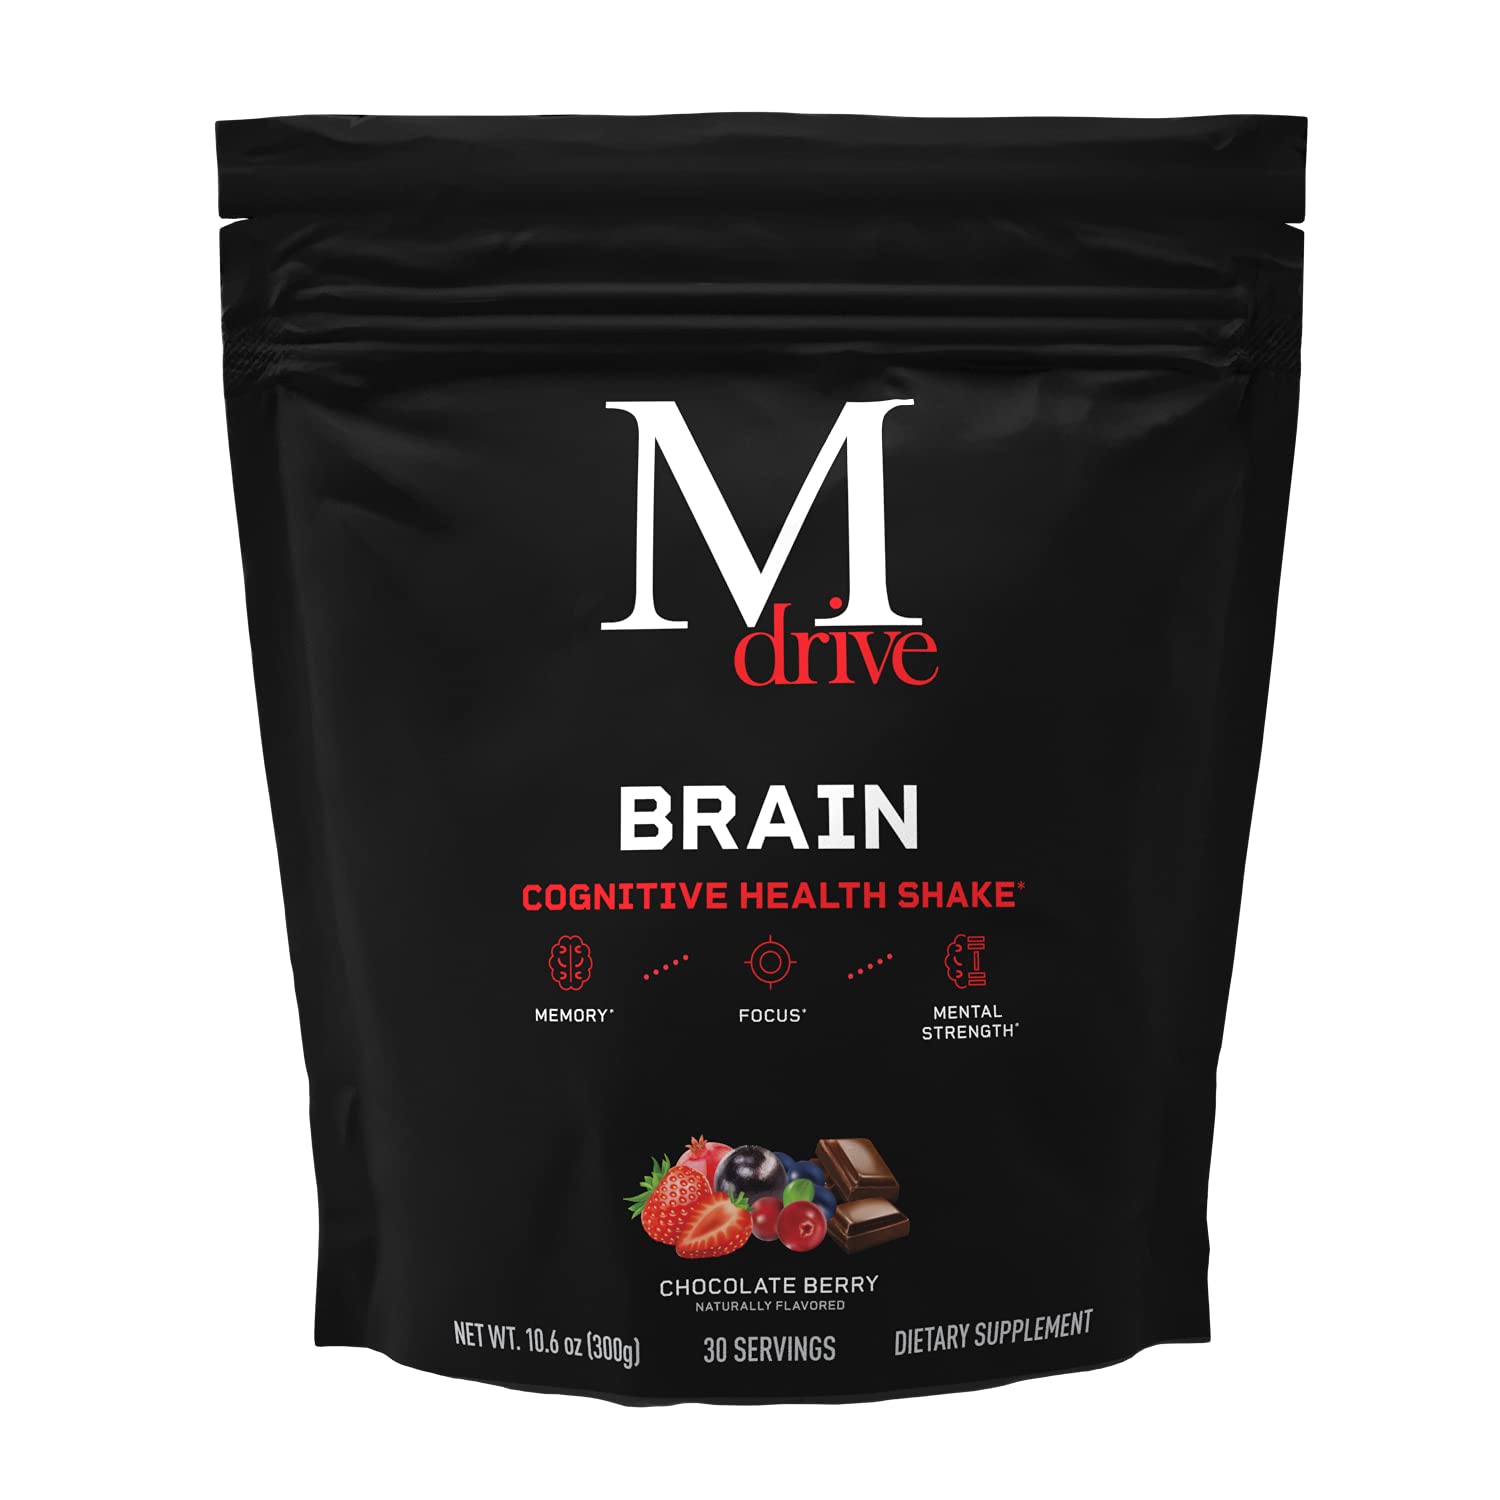 Mdrive Brain for Men, Nootropic and Cognitive Health Shake for Memory Preservation, Alertness, Calmness, Mental Focus, Cognitive Ability, Brain Fun...